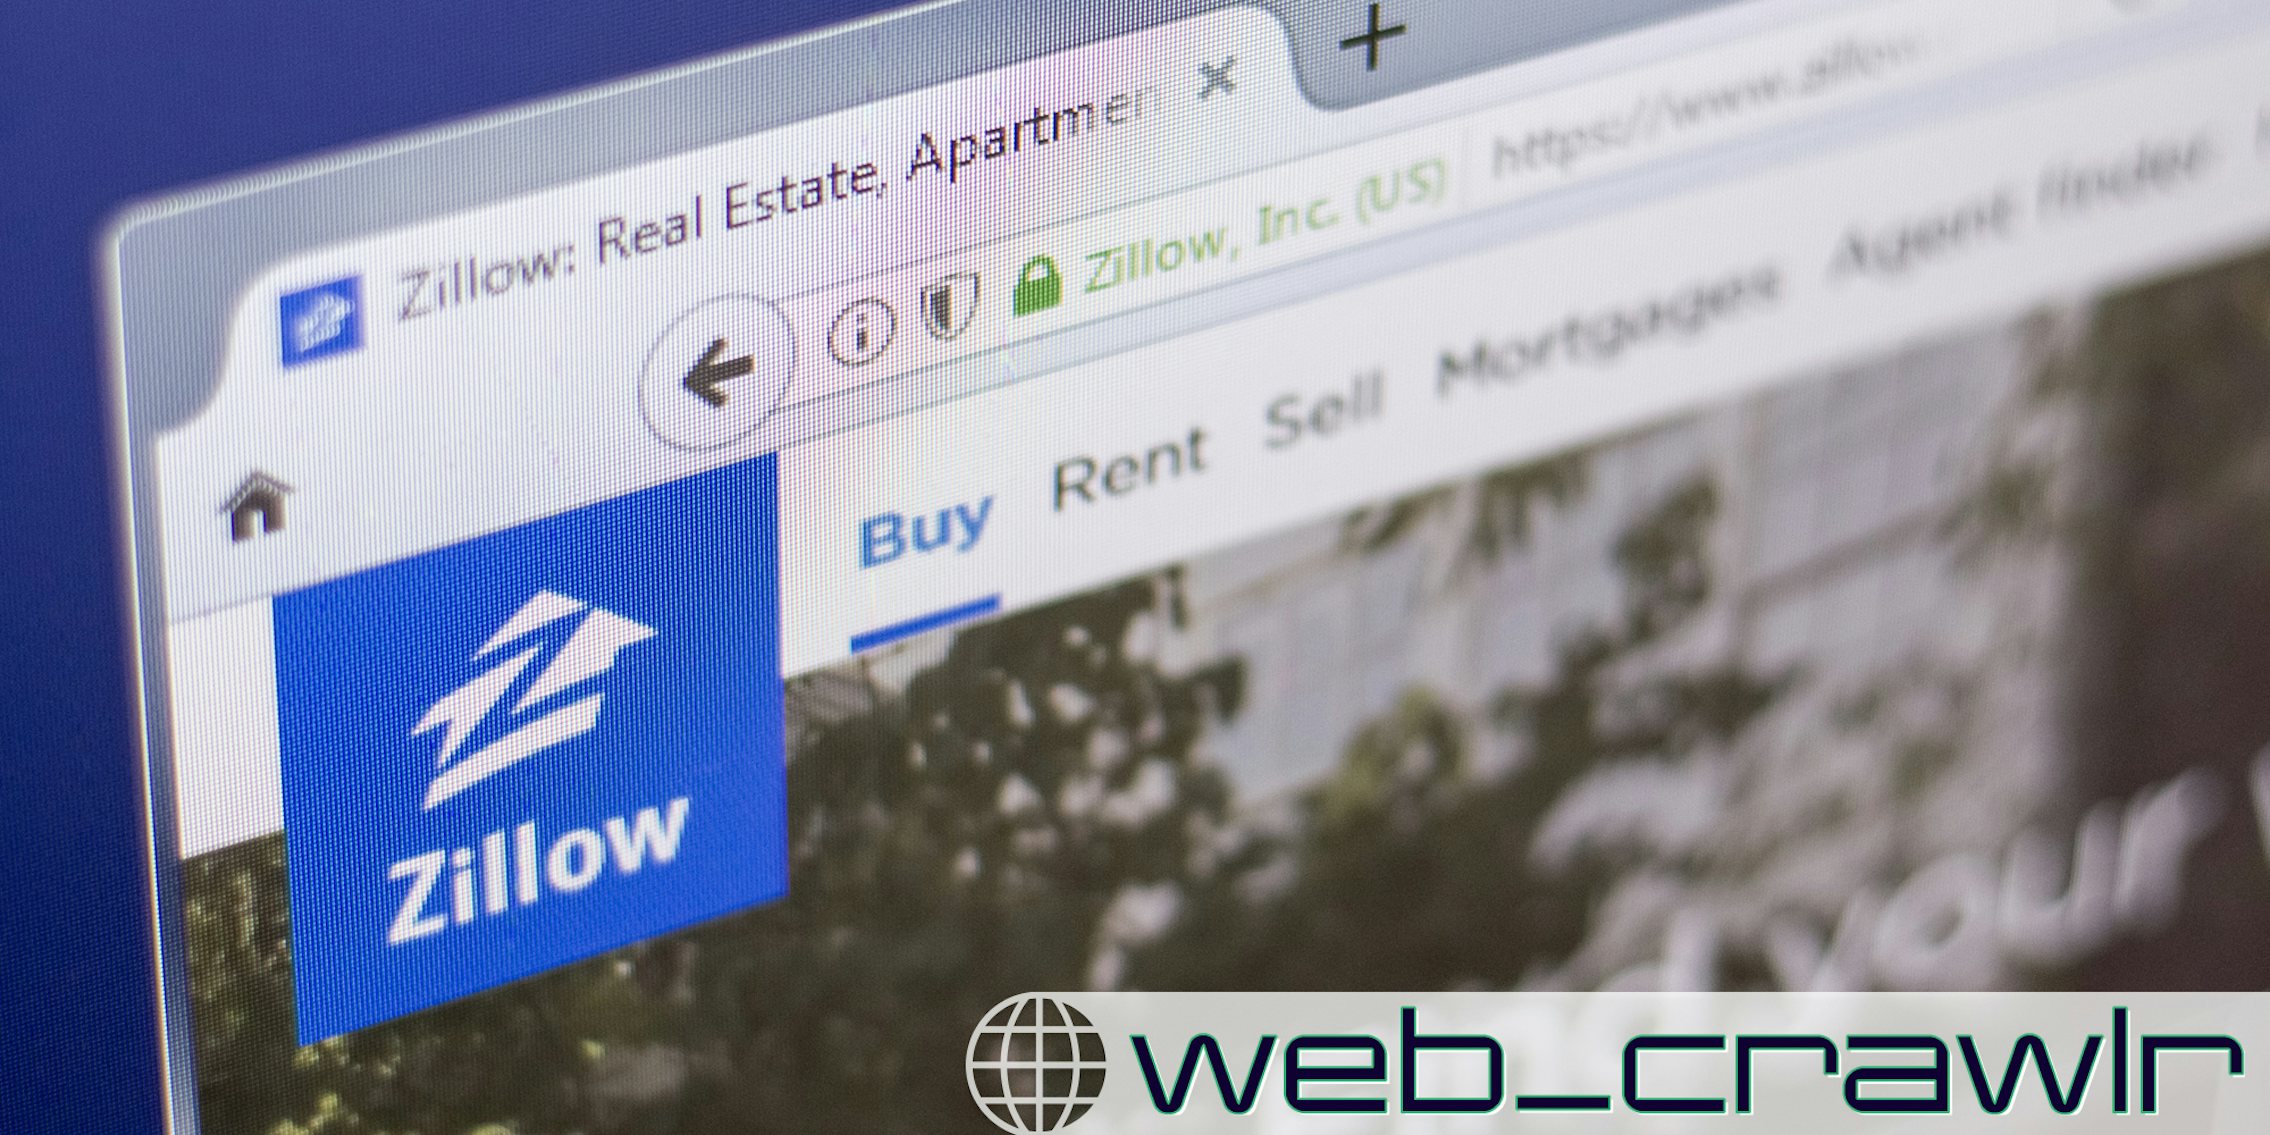 A computer screen showing the Zillow website. The Daily Dot newsletter web_crawlr logo is in the bottom right corner.